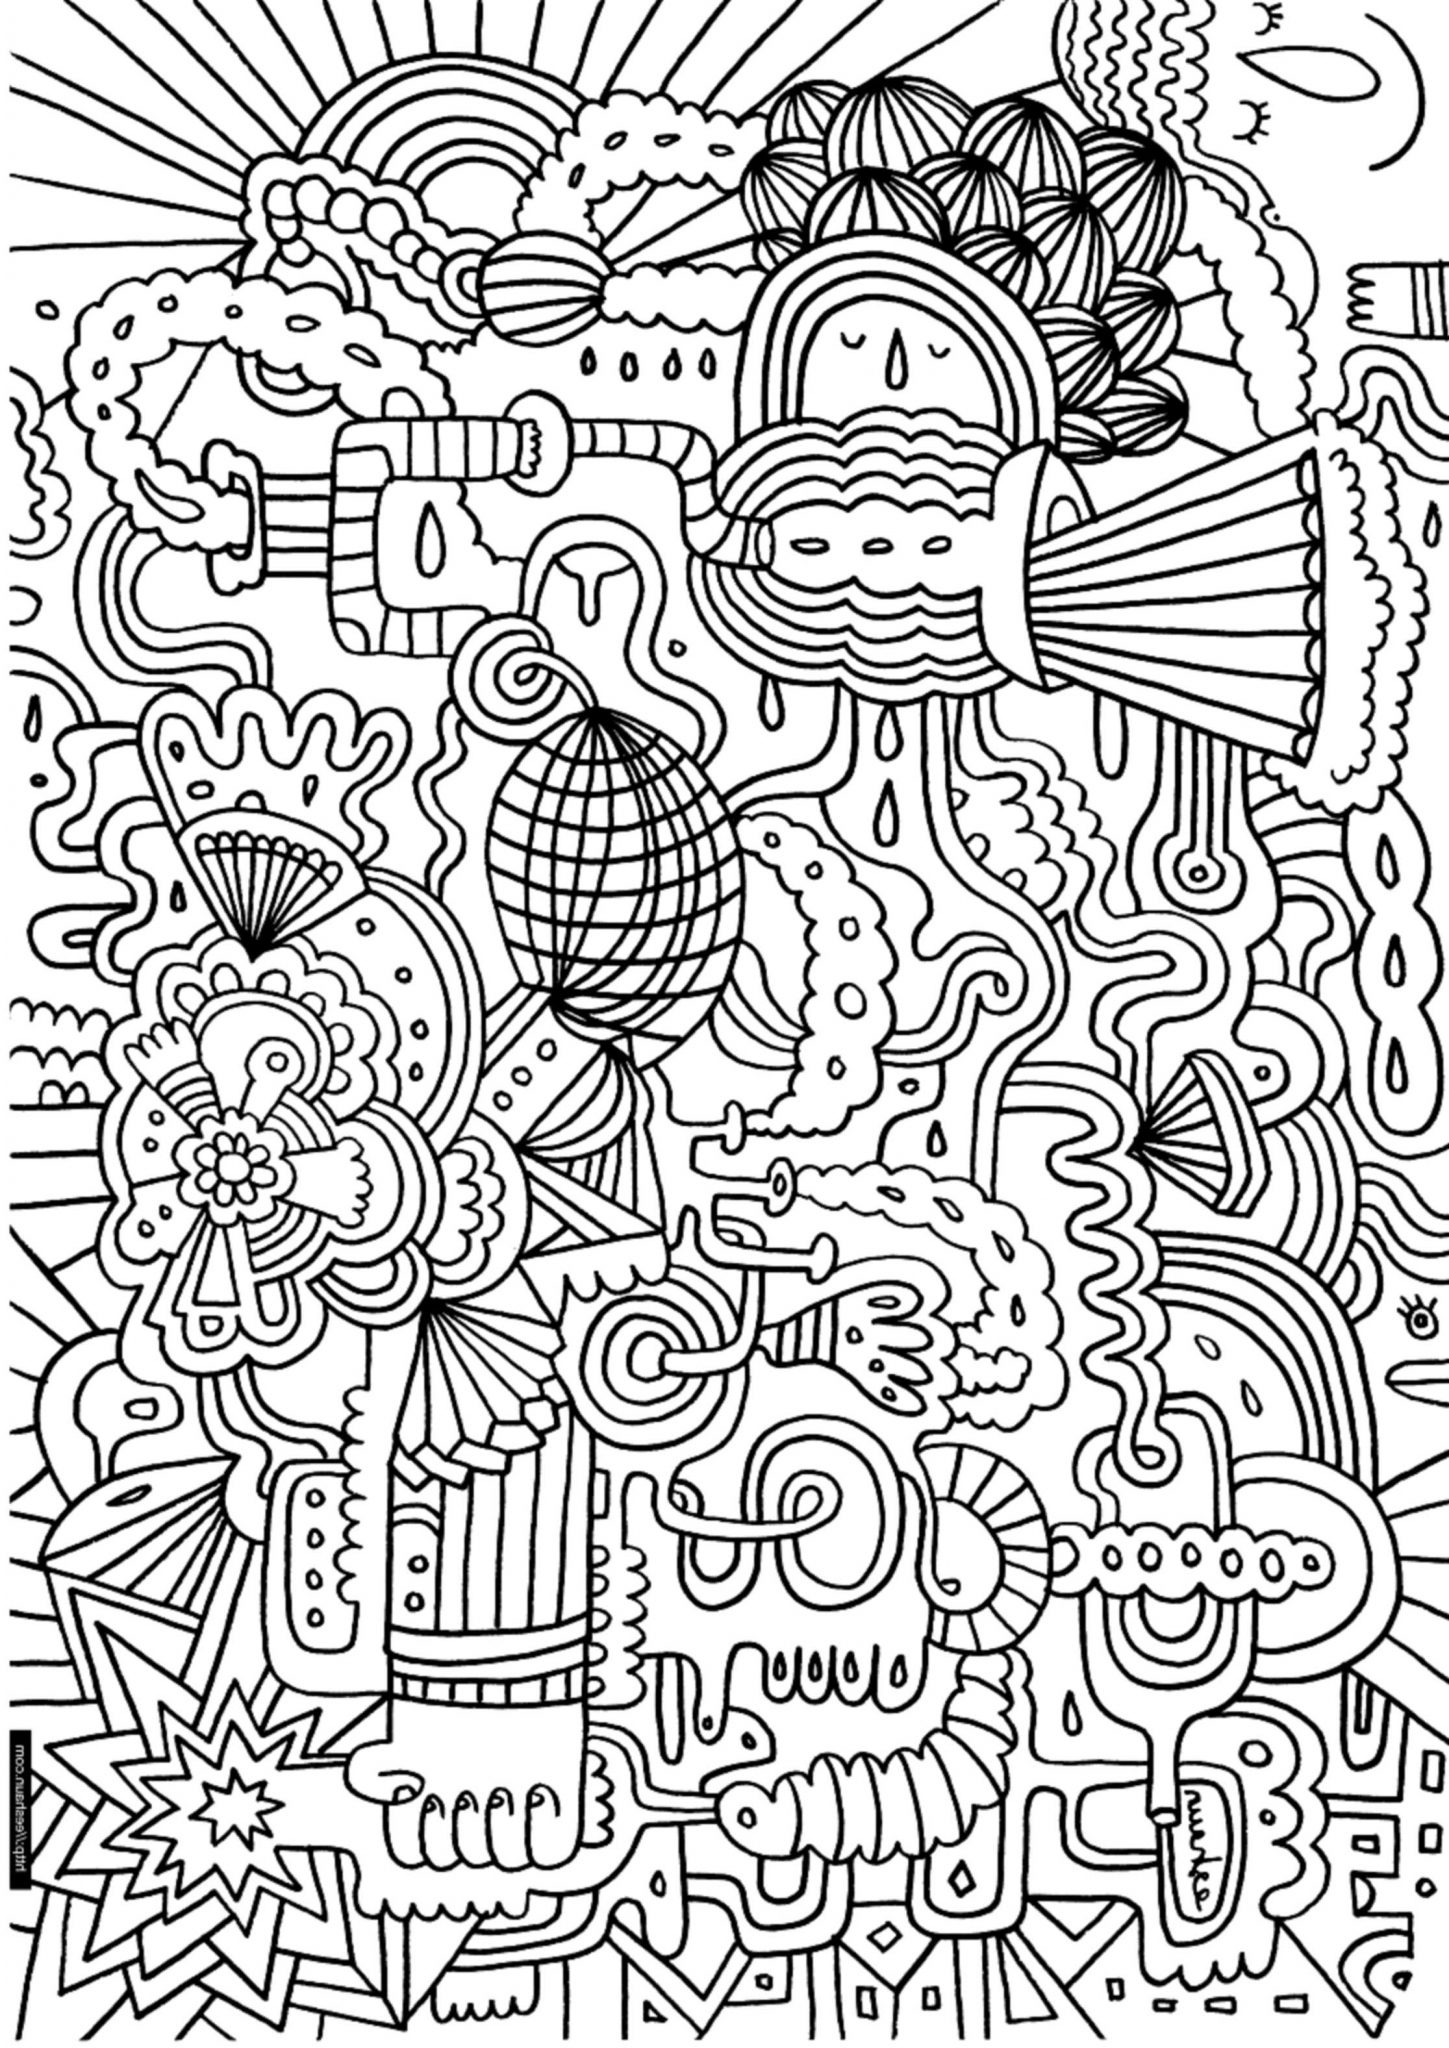 Download Print & Download - Complex Coloring Pages for Kids and Adults